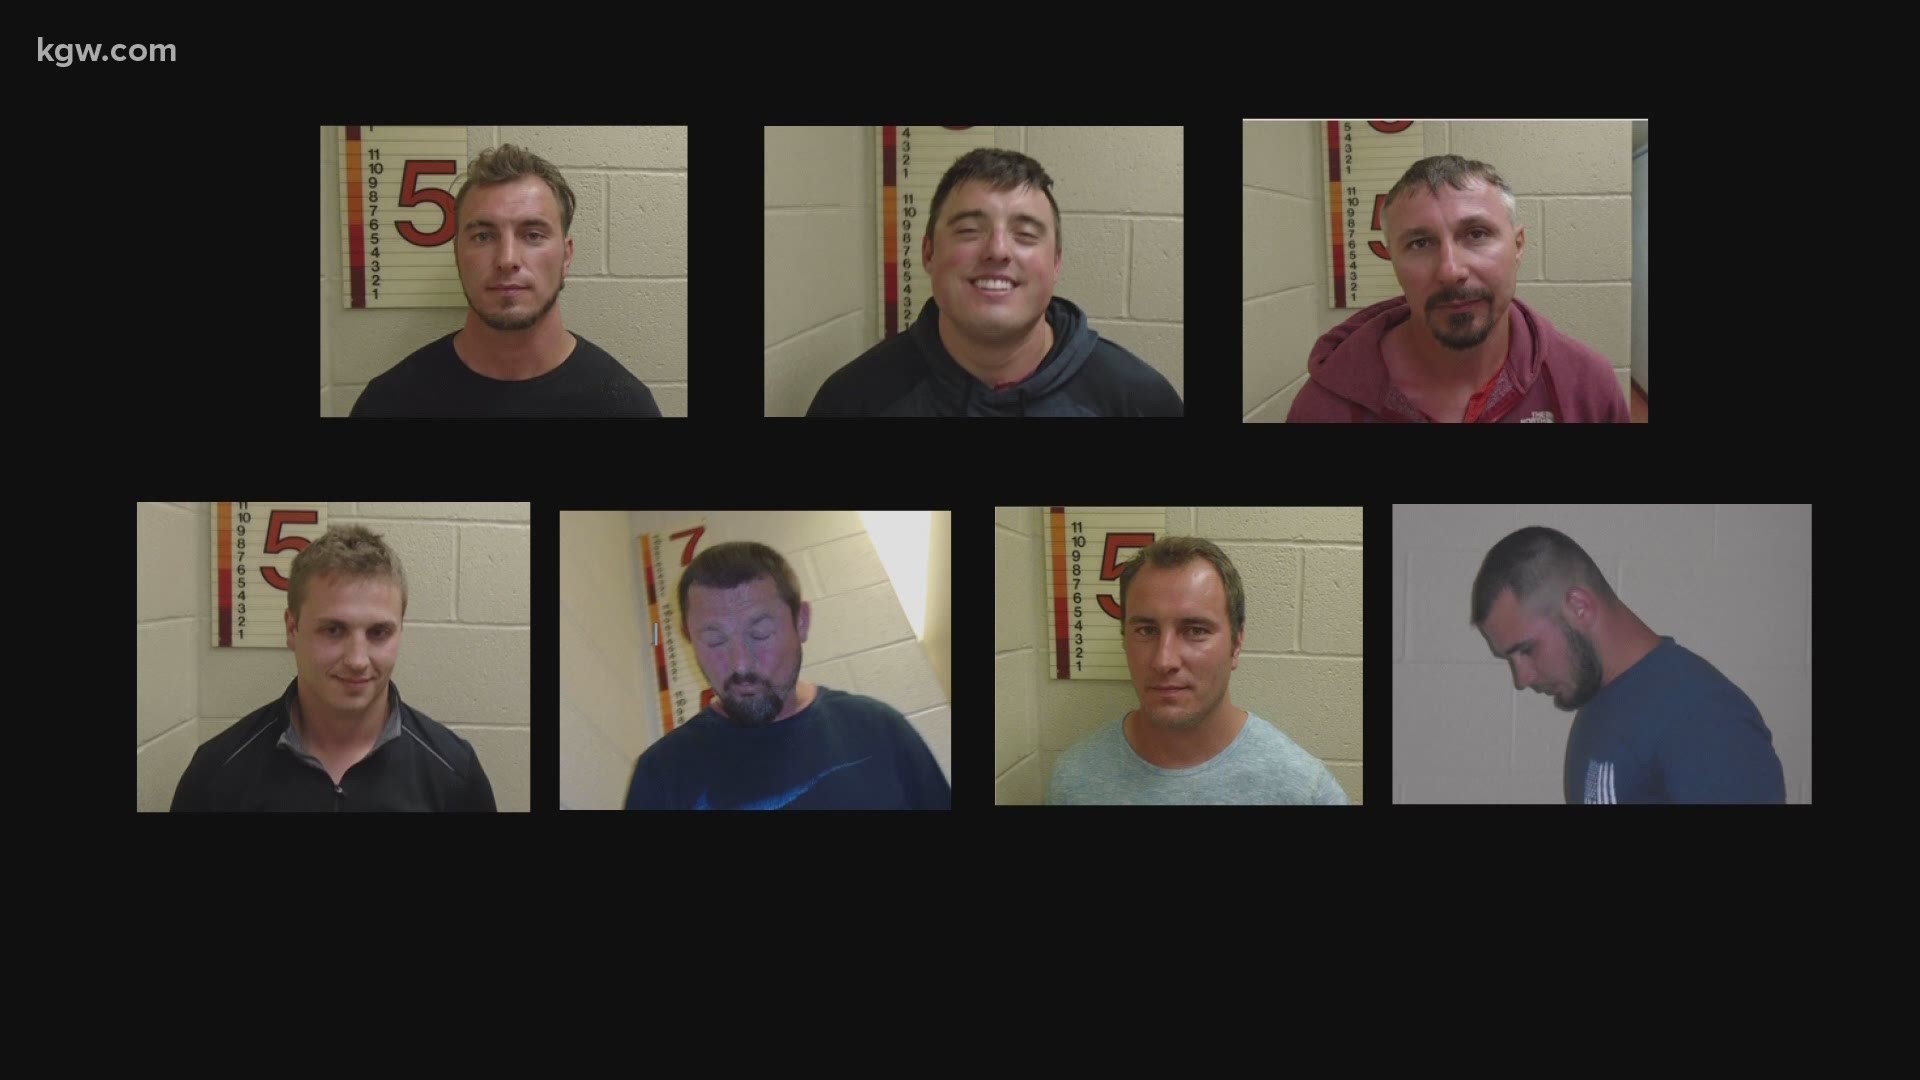 Police arrested 7 men from Clark County after they allegedly yelled racial slurs, gave Nazi salutes and threw fireworks at a Black family.